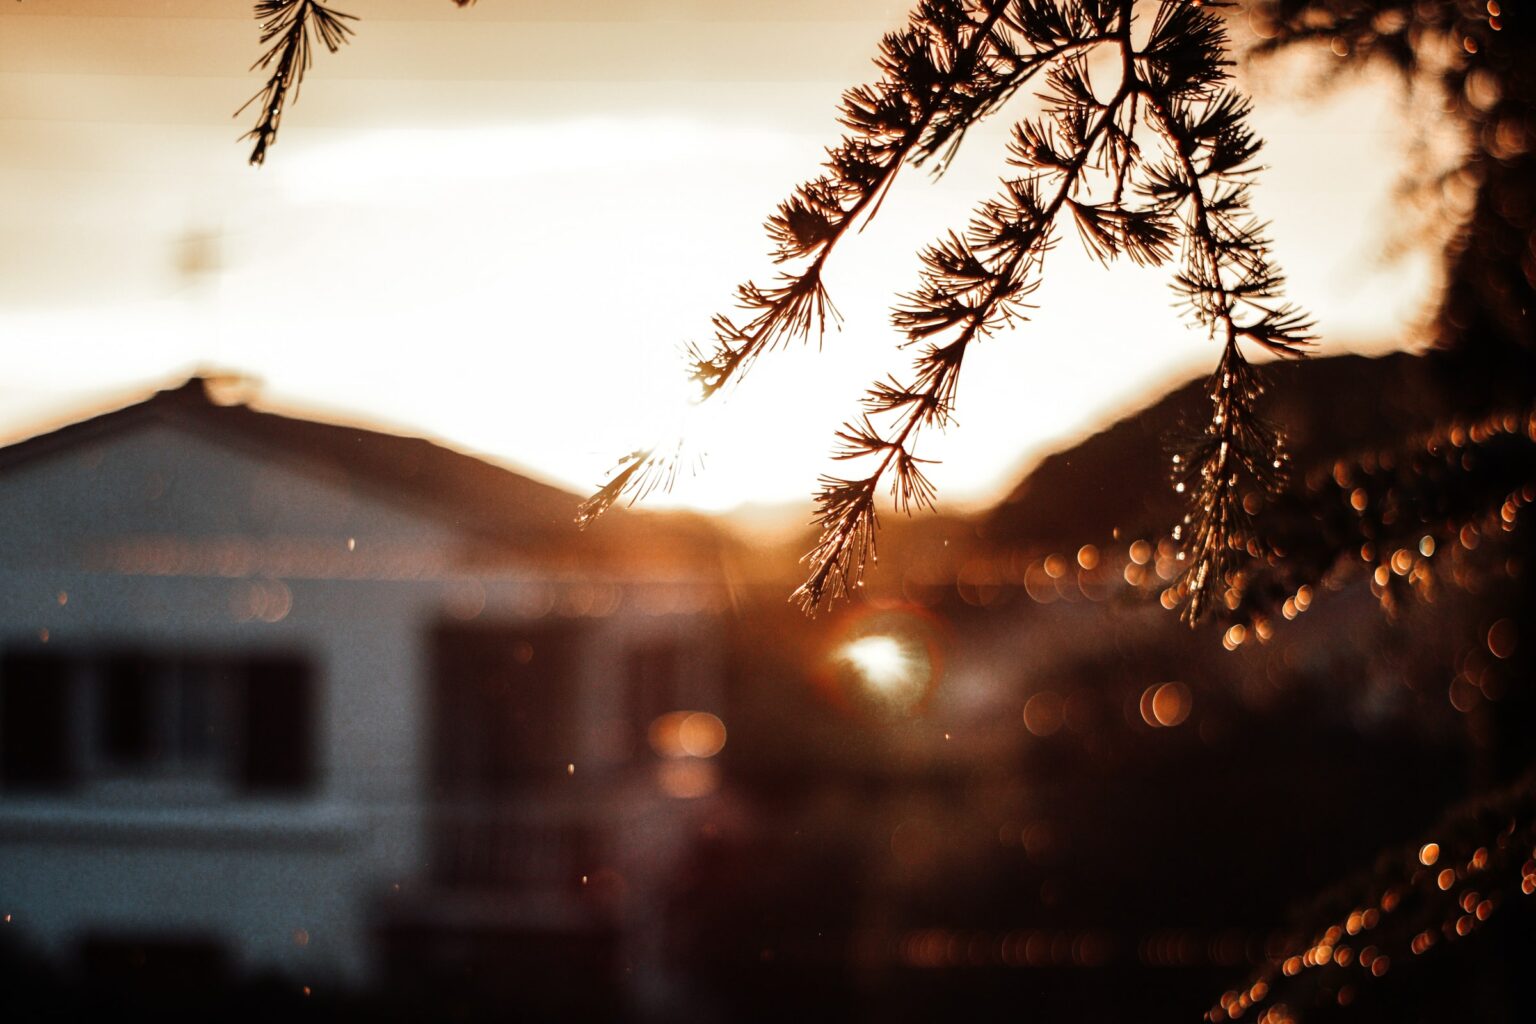 Warm tone photograph with a pine branch in the foreground and sunlight glinting off a house roof in the background. The light is catching off a few small rain droplets.